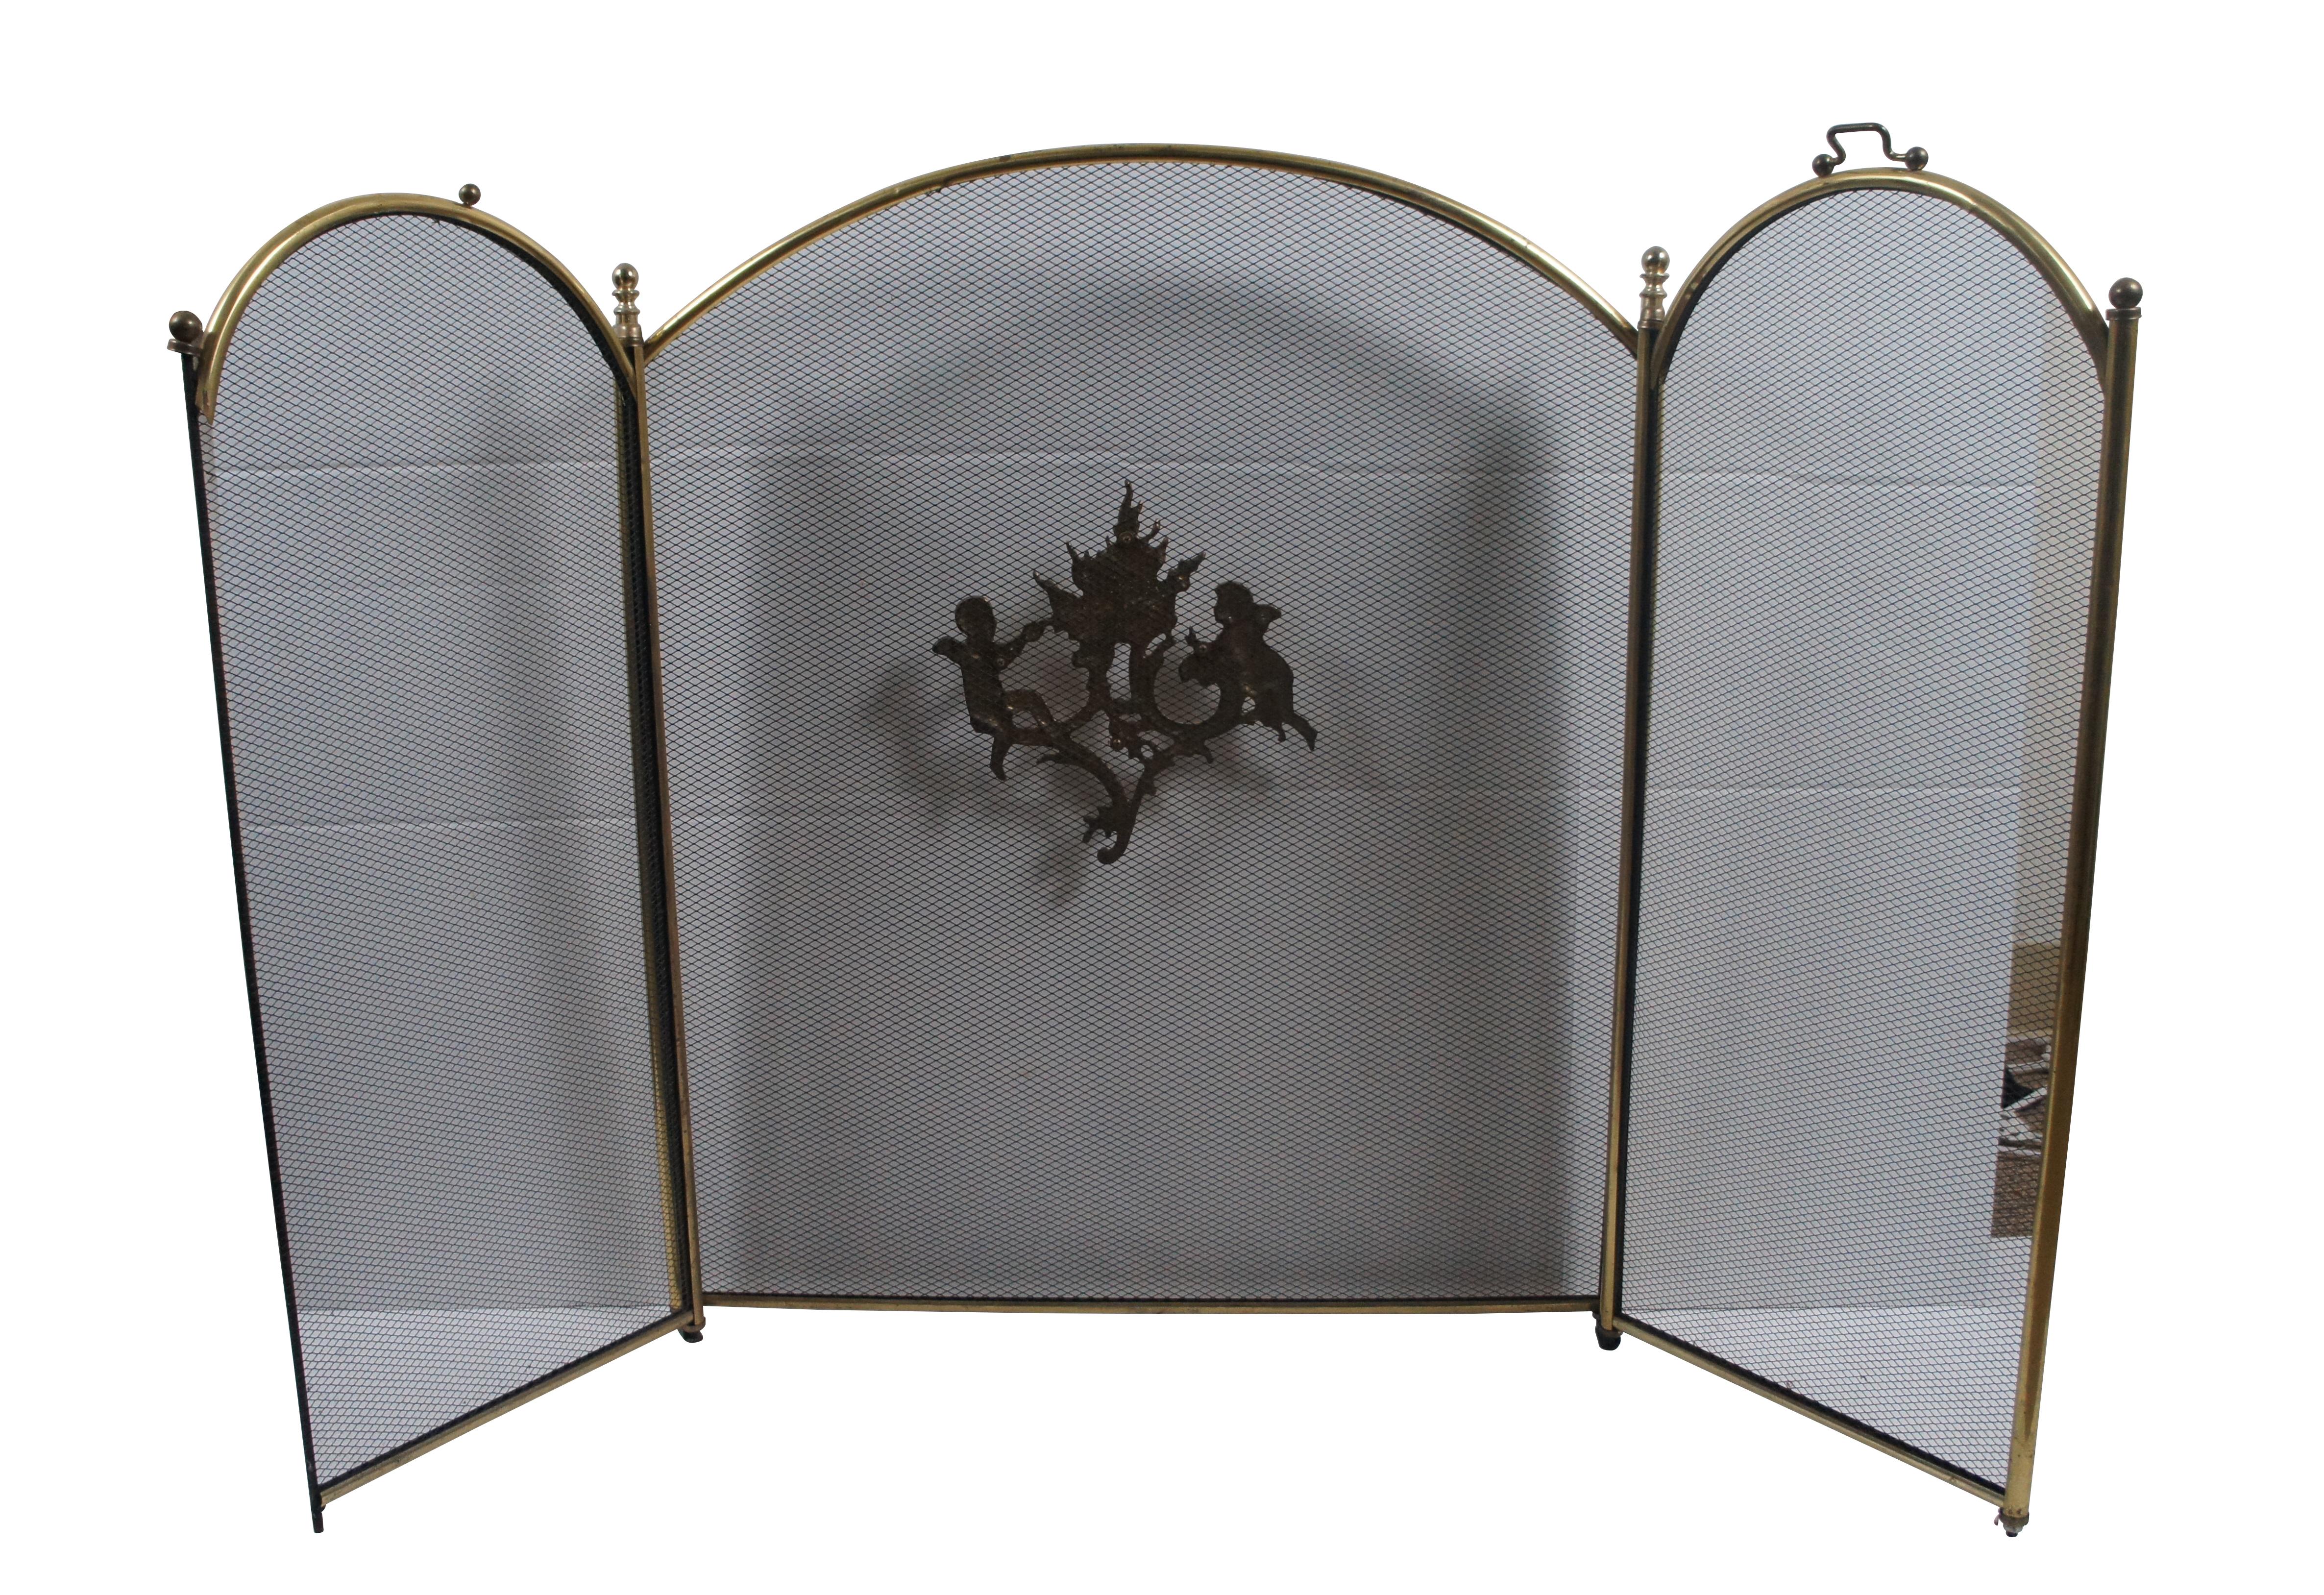 Antique brass and metal mesh fireplace / hearth screen featuring three arch topped folding panels, round finials, and squared off handles. The central panel is embellished with an applique showing a pair of cherubs stoking a fire.

Dimensions:
50